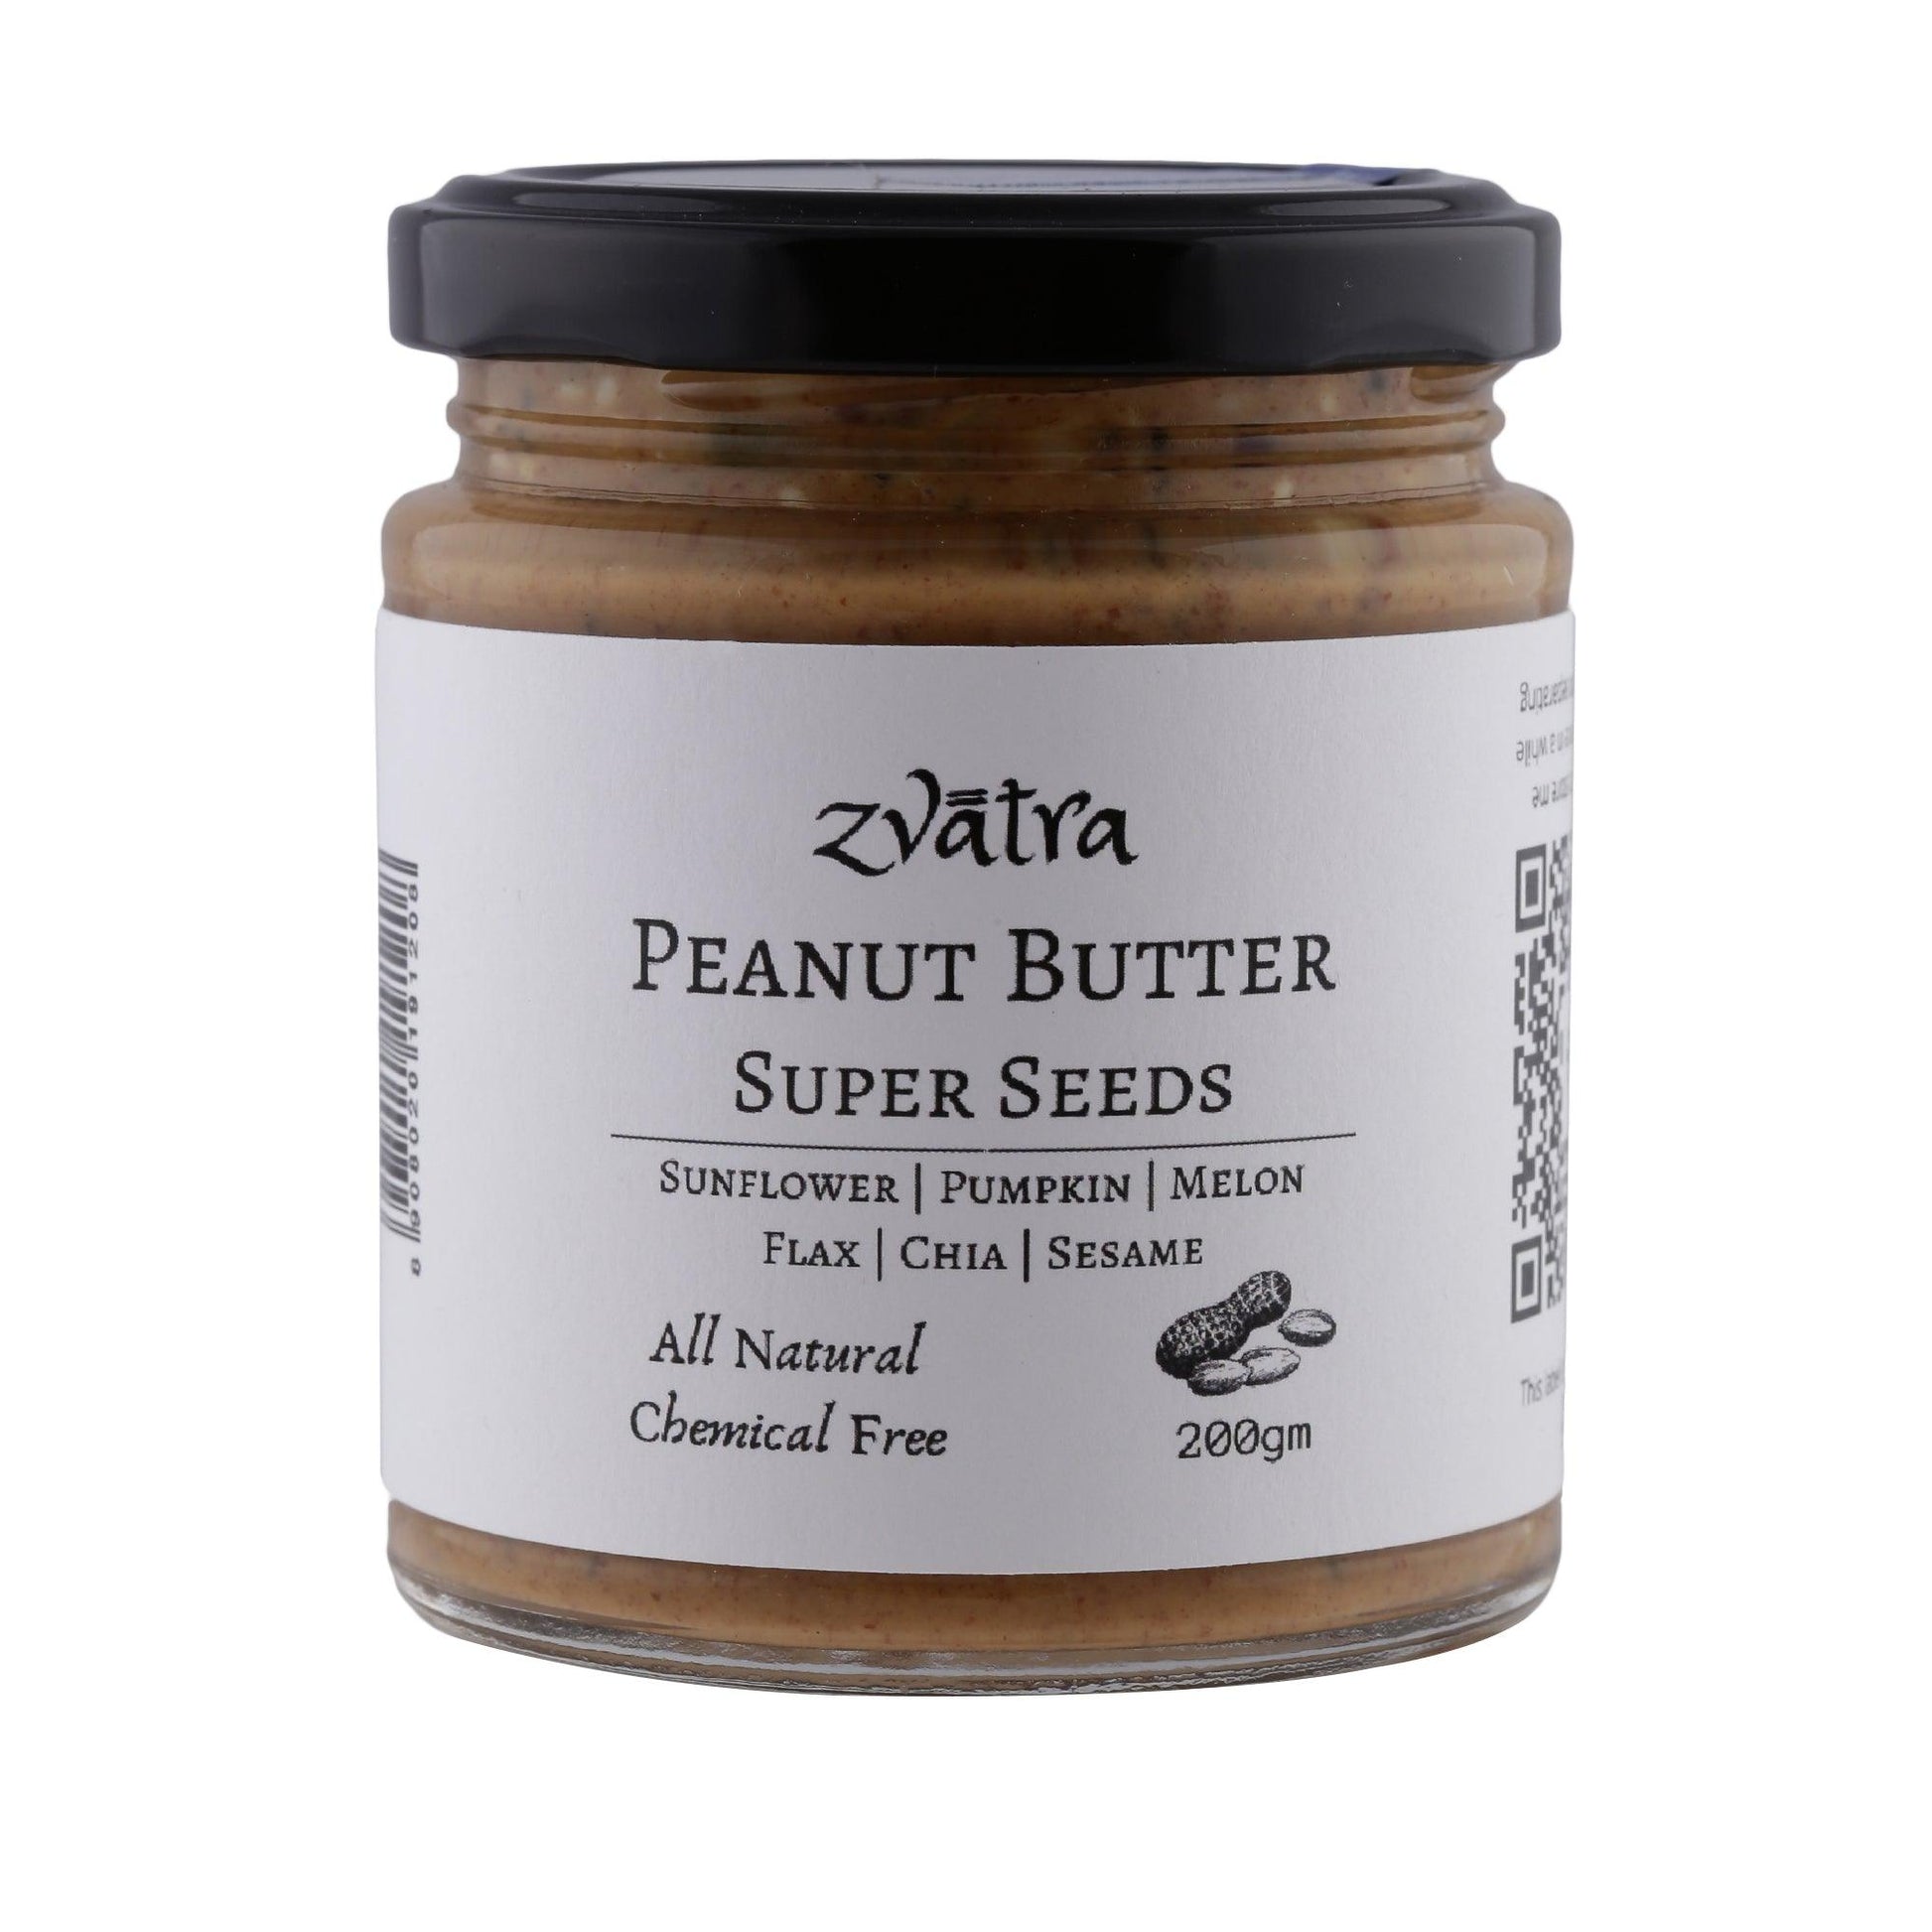 Peanut Butter - Super Seeds - Sweetened with Jaggery - Wildermart